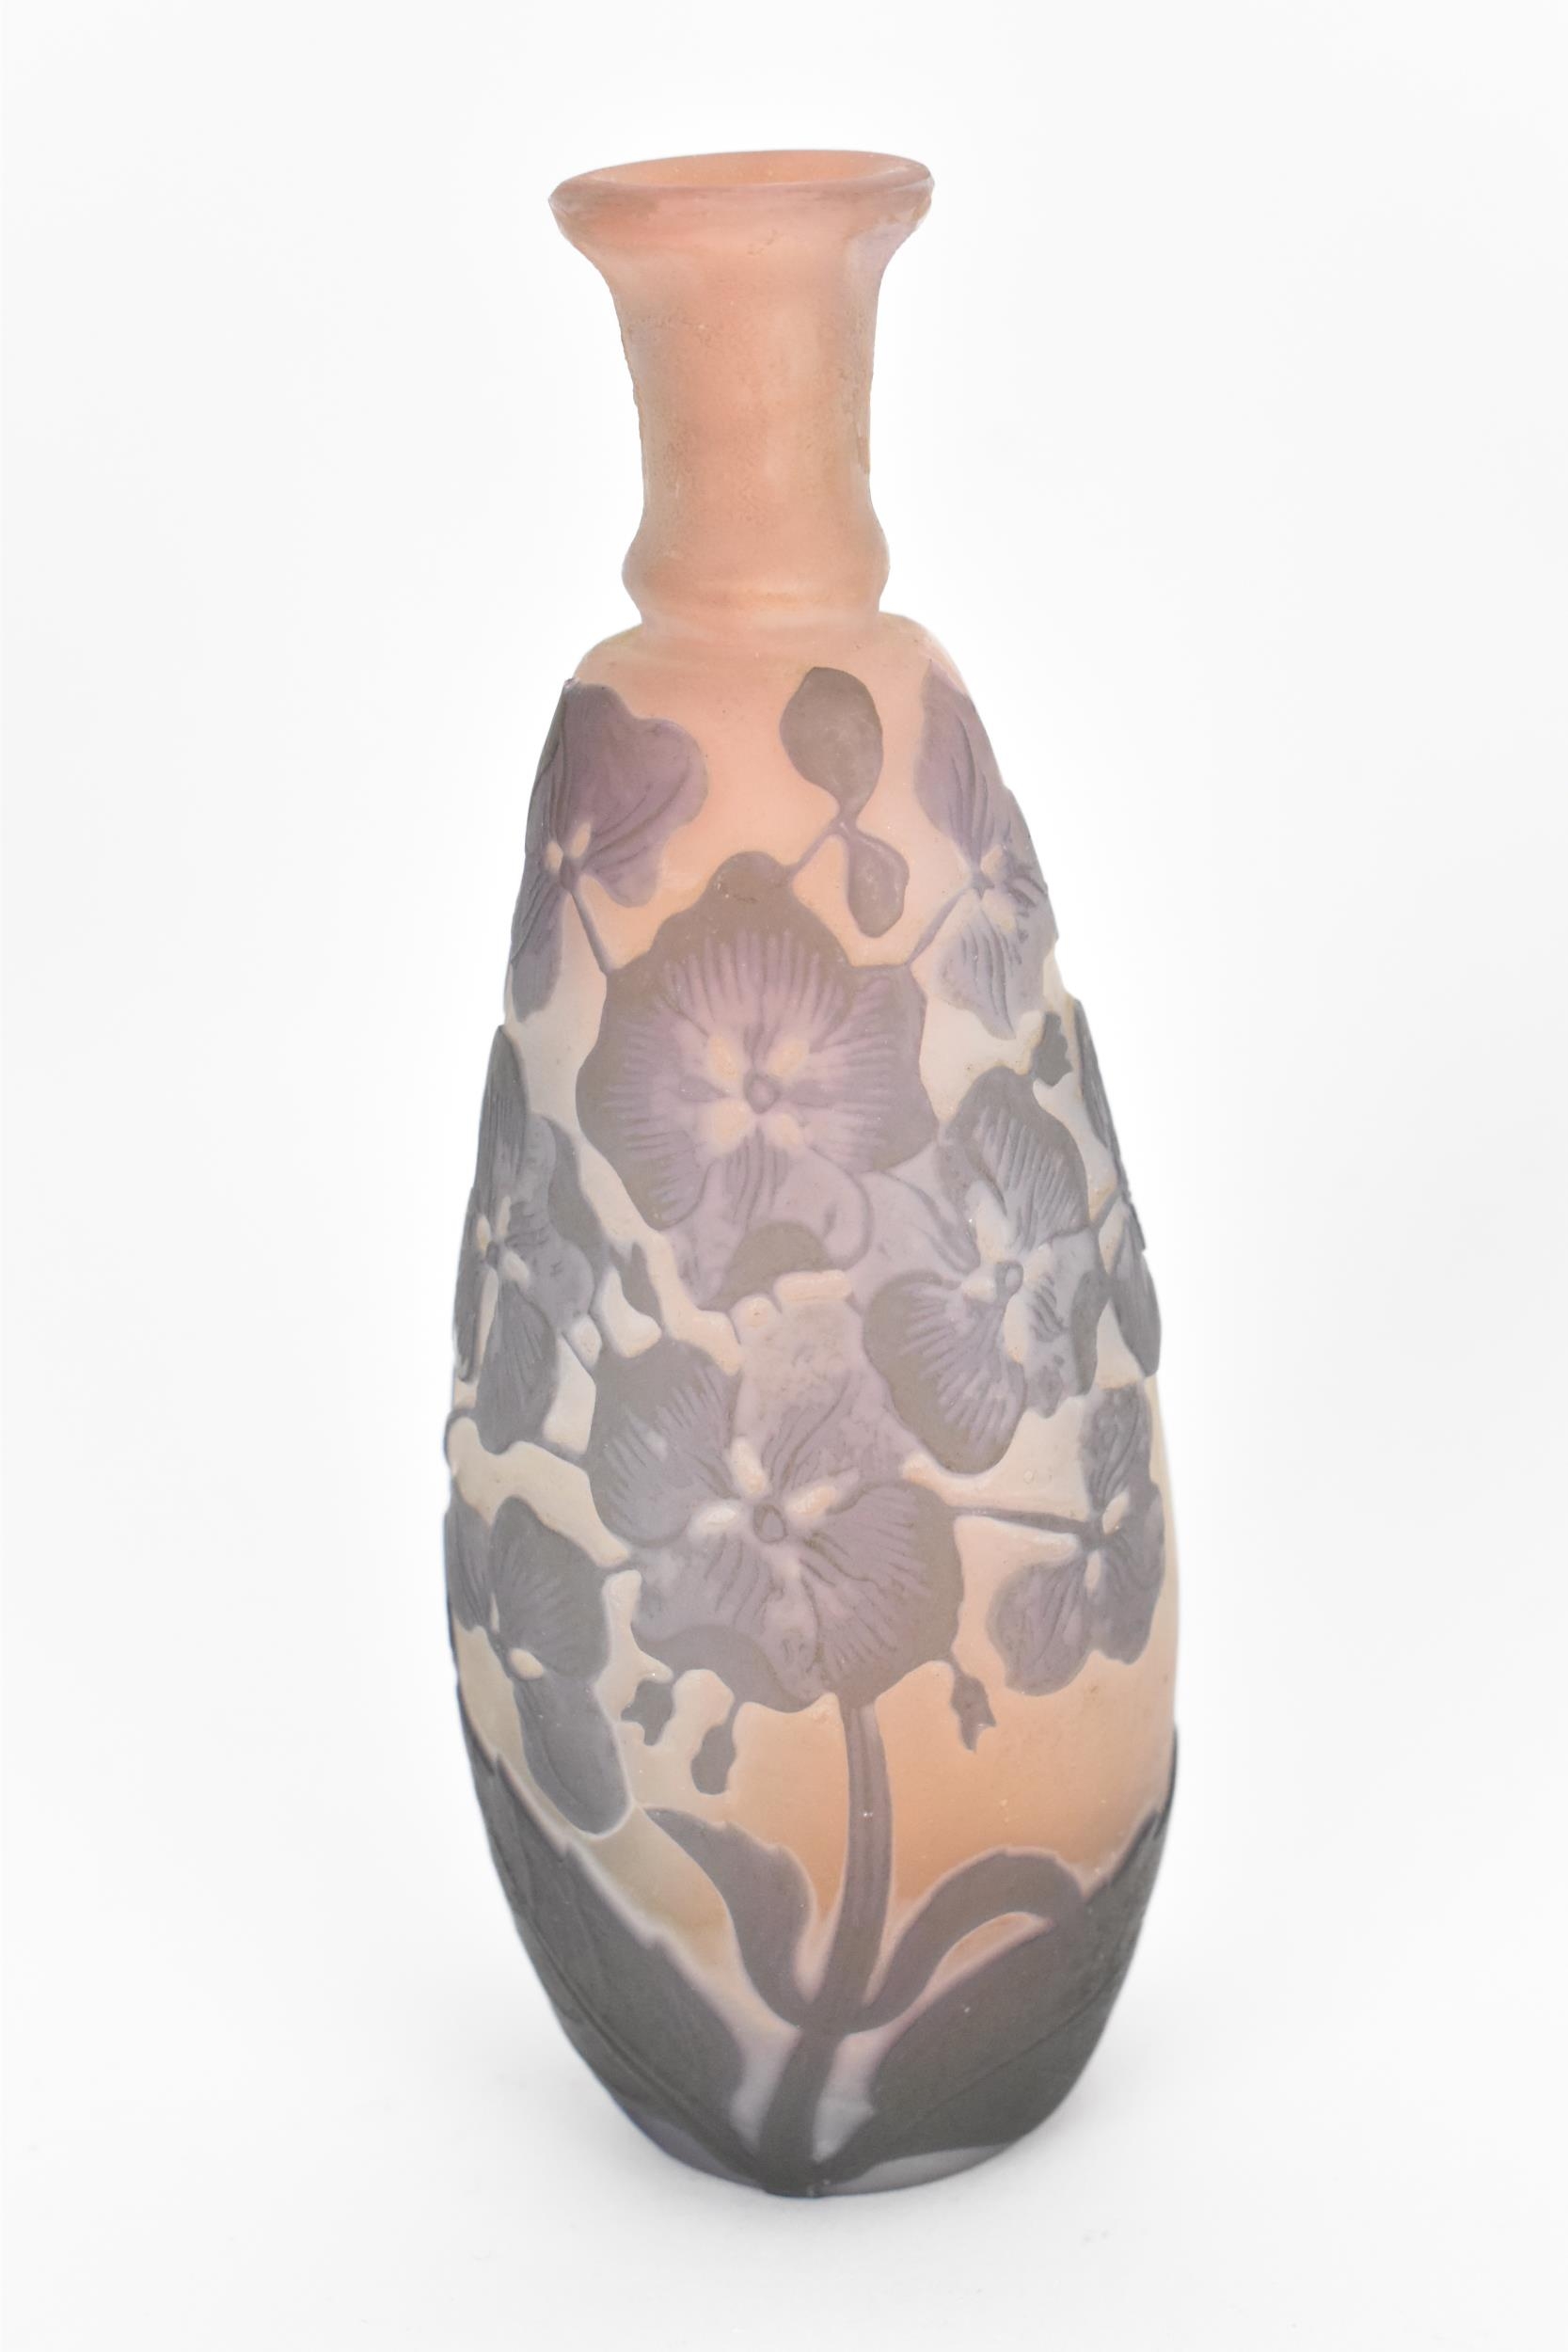 After Emile Galle: two cameo glass bud vases, possibly early 20th century, one with purple floral - Image 2 of 8